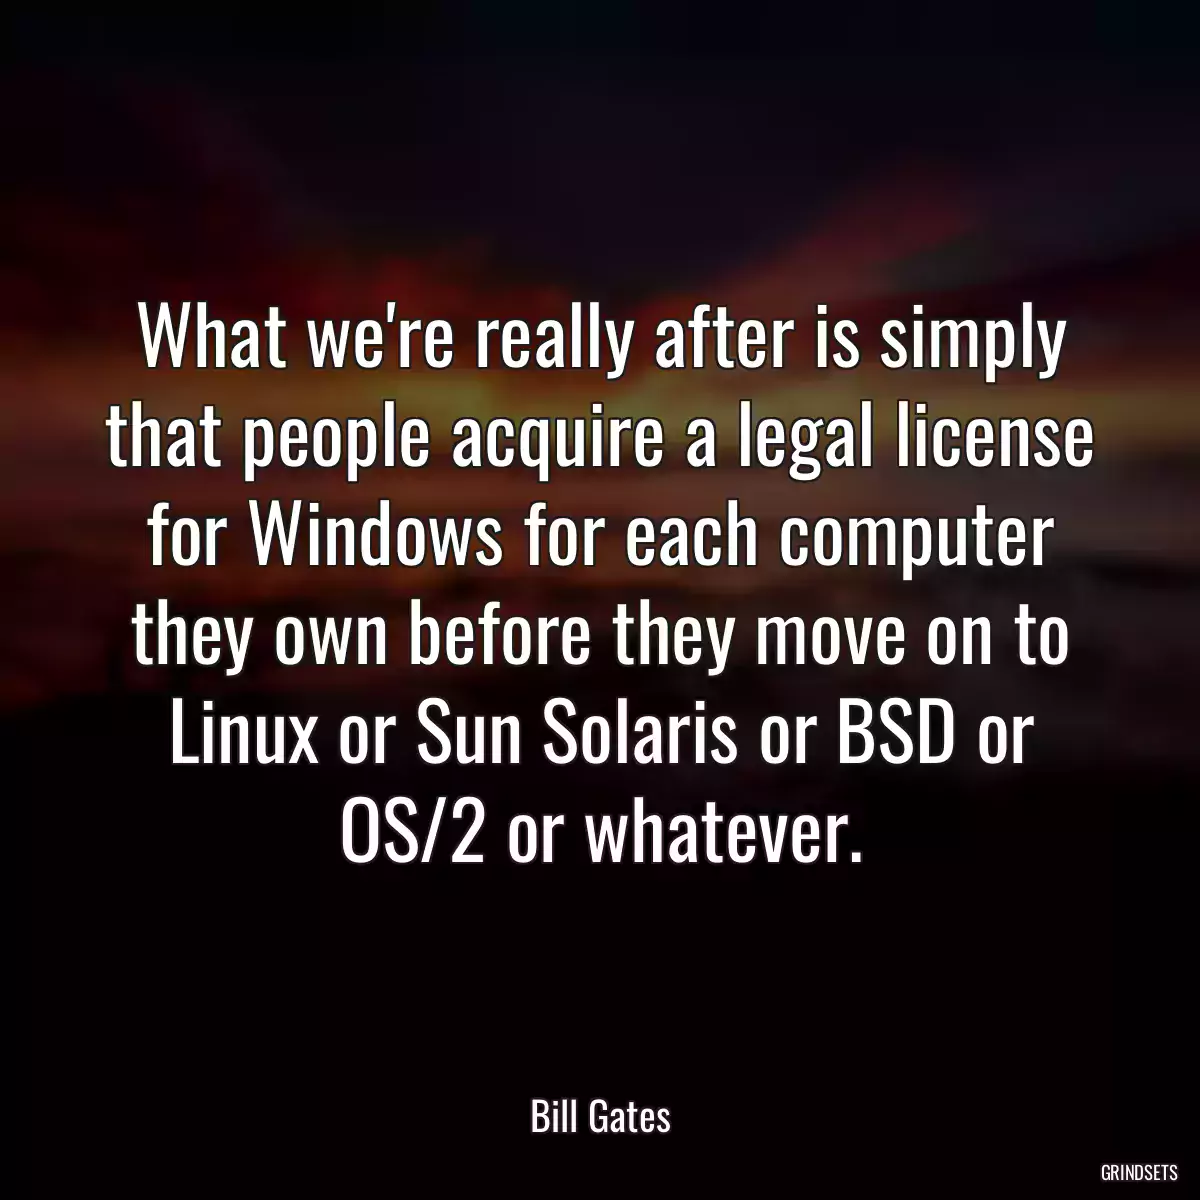 What we\'re really after is simply that people acquire a legal license for Windows for each computer they own before they move on to Linux or Sun Solaris or BSD or OS/2 or whatever.